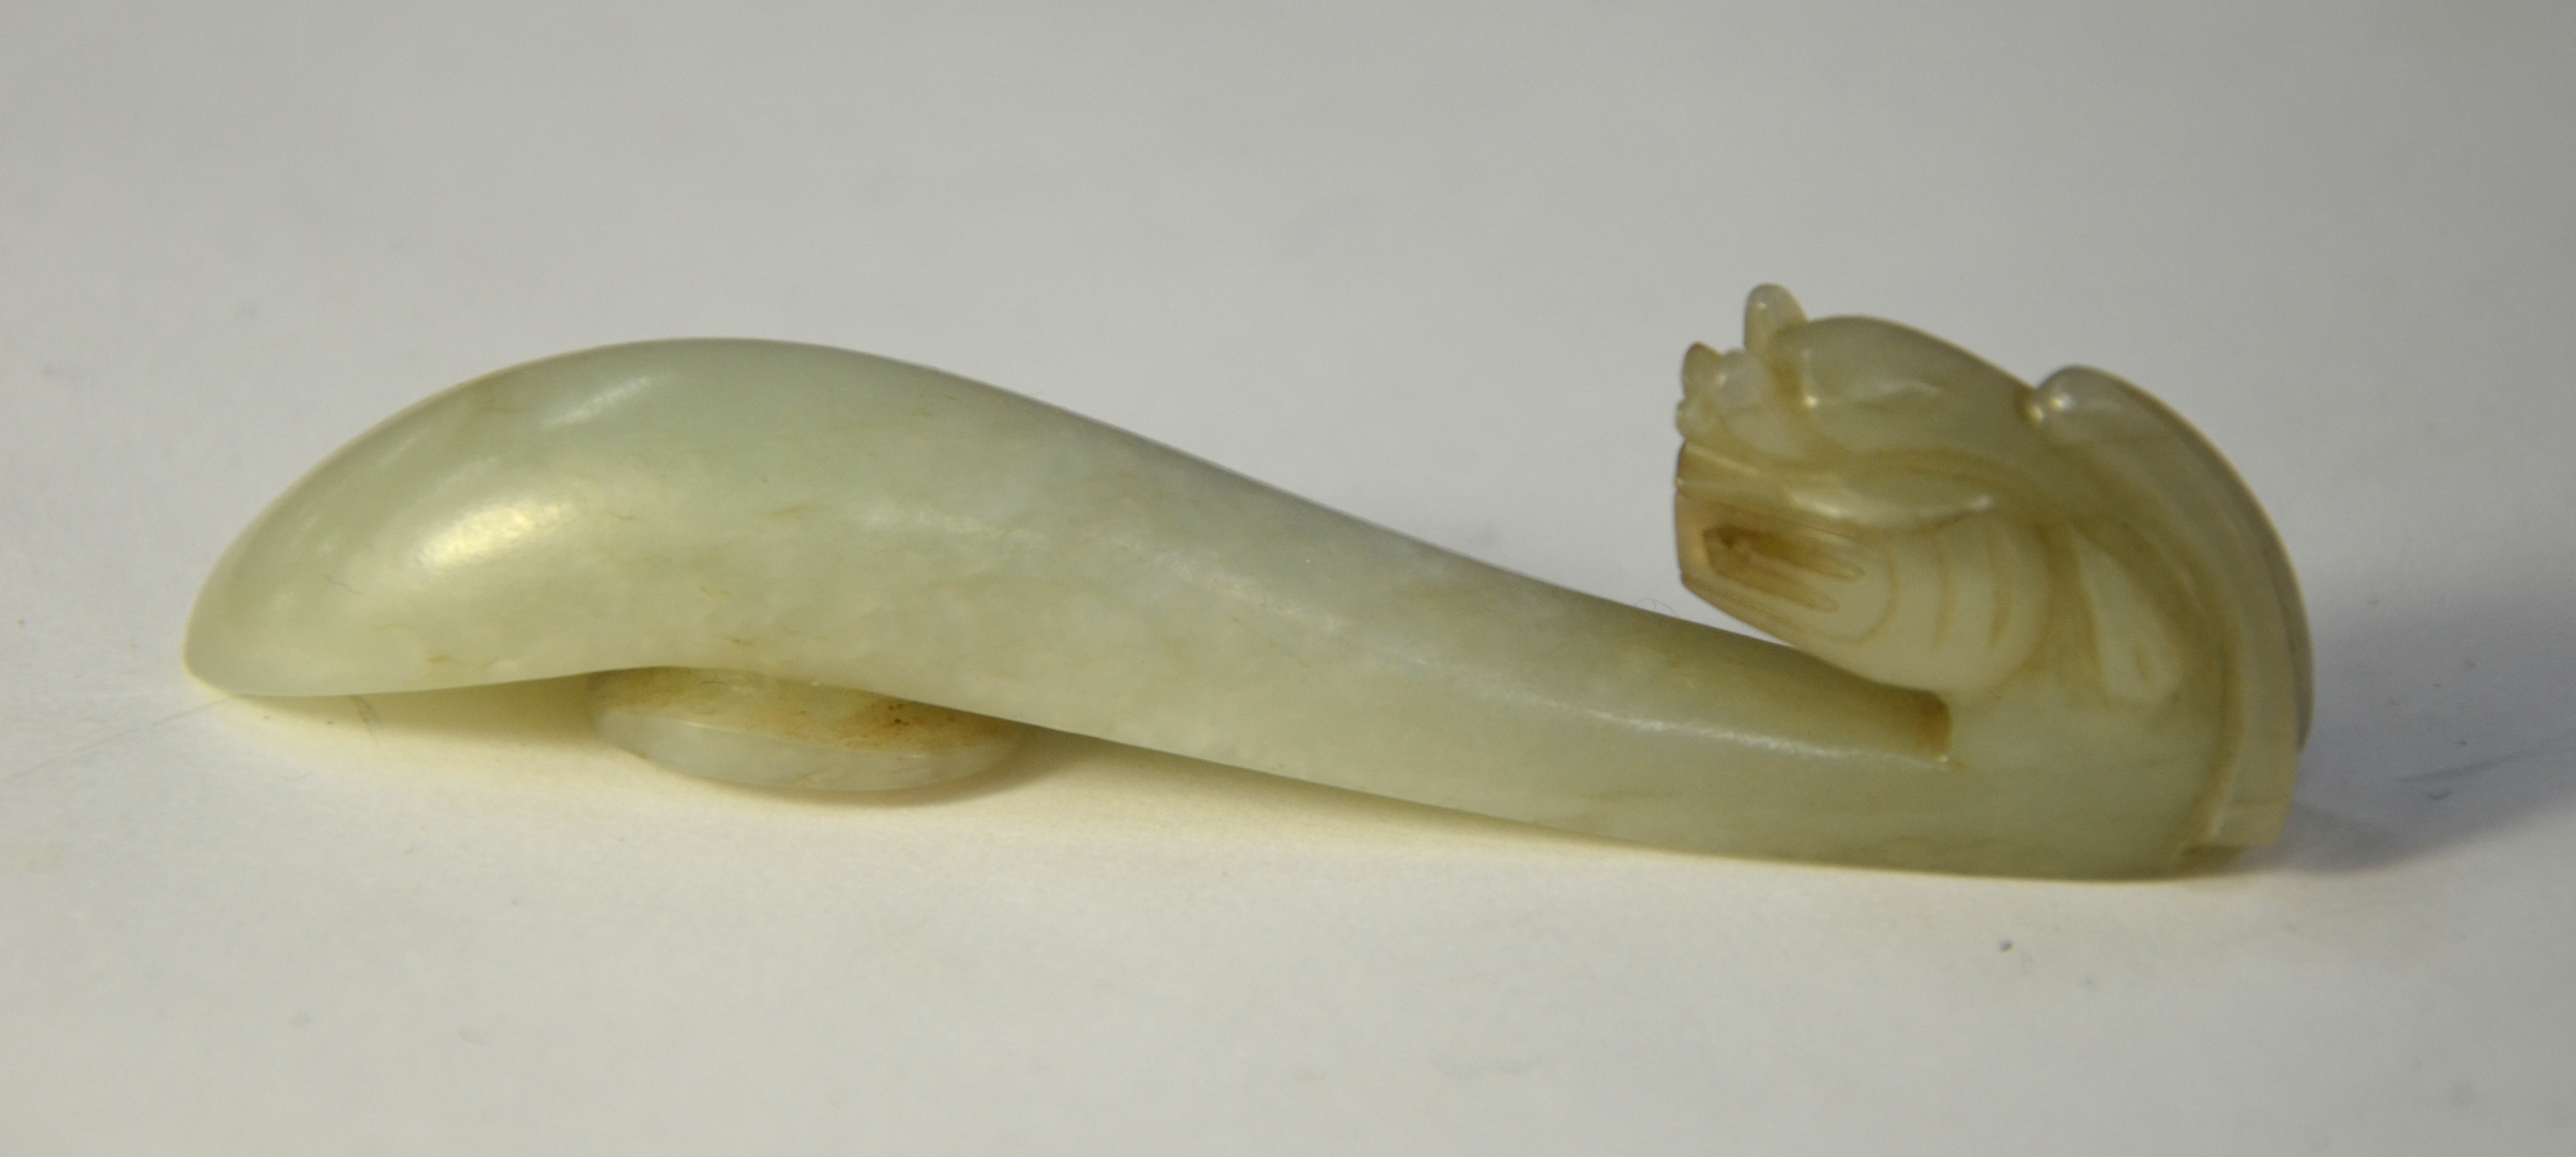 A mottled jade belt hook with mythological animal head and oval boss; 8.5 cm long, Qing Dynasty or - Image 3 of 6